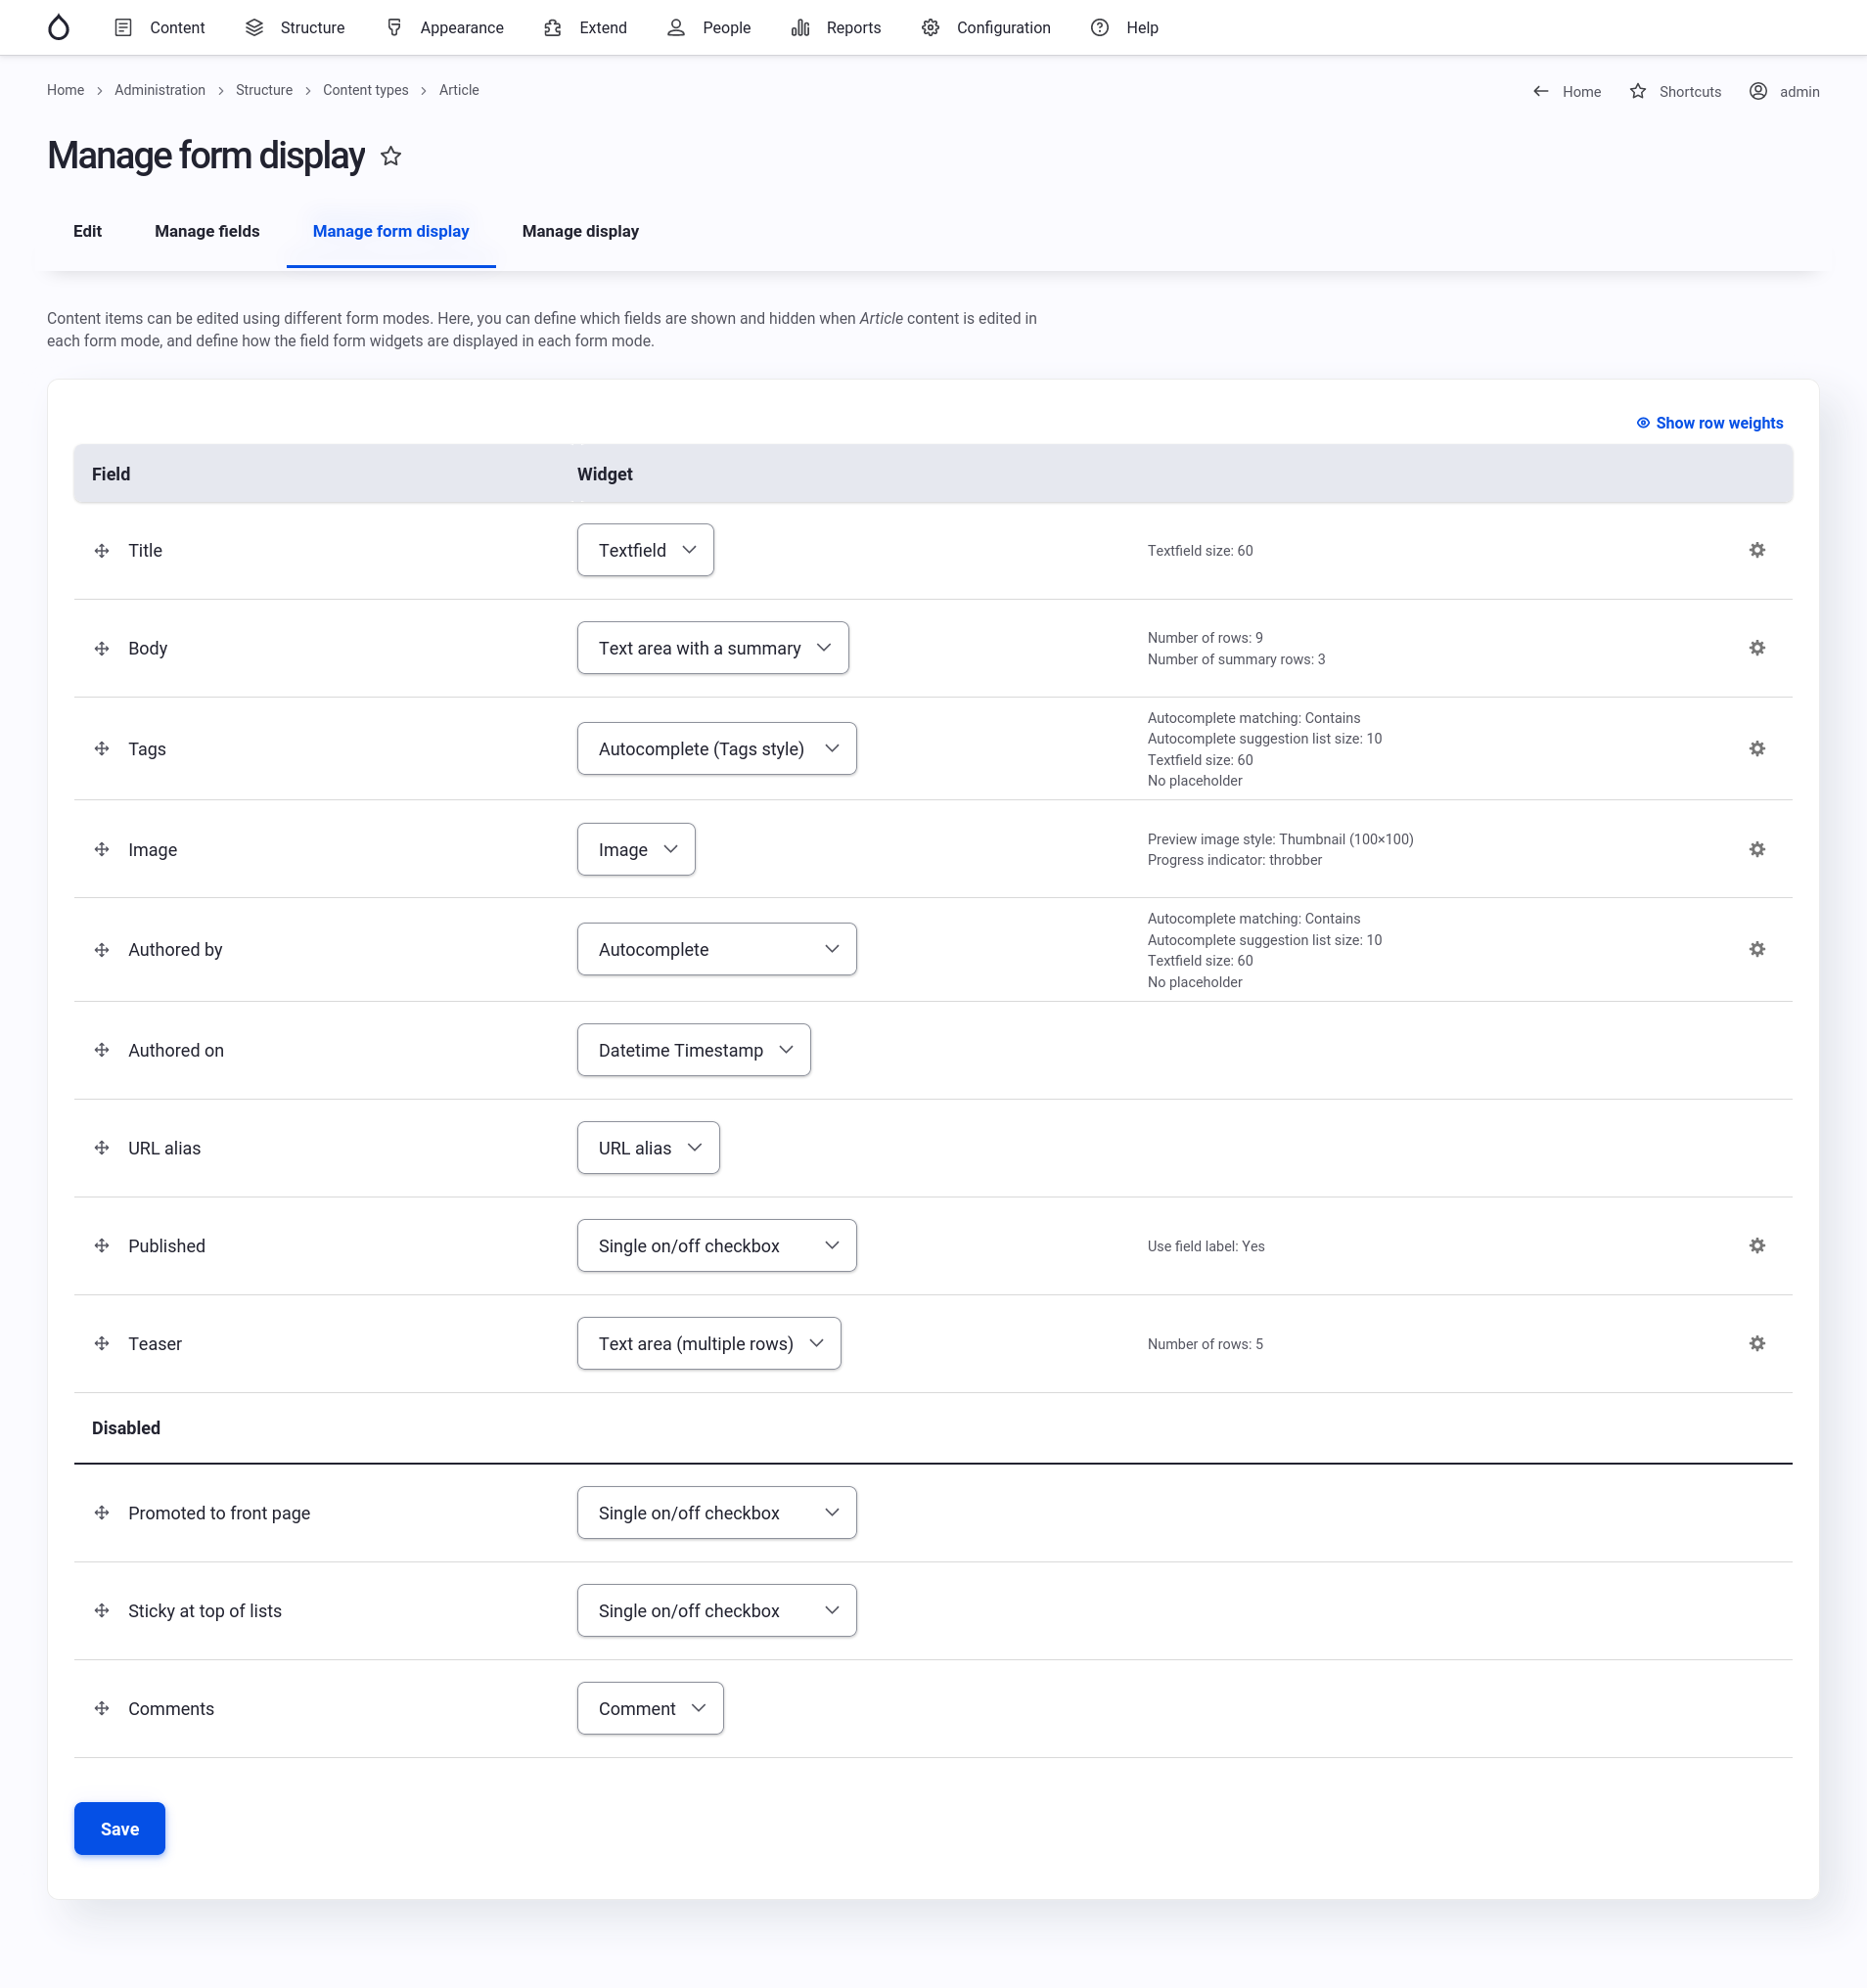 The Manage form display configuration page for the Article content type.